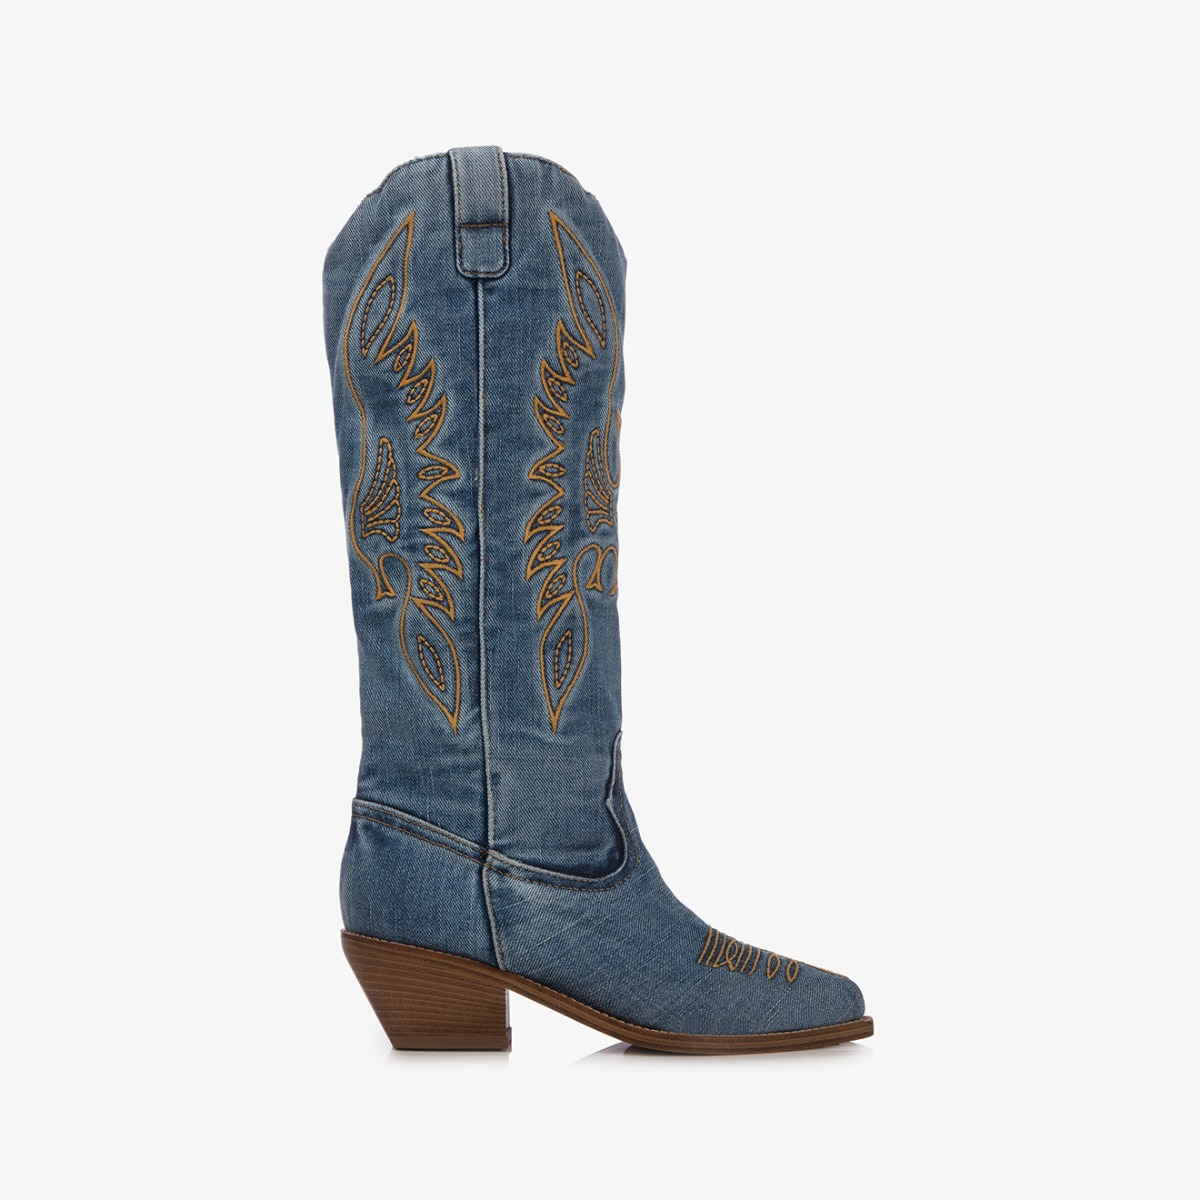 CHRISTINE COWBOY BOOT 60 mm - Le Silla official outlet